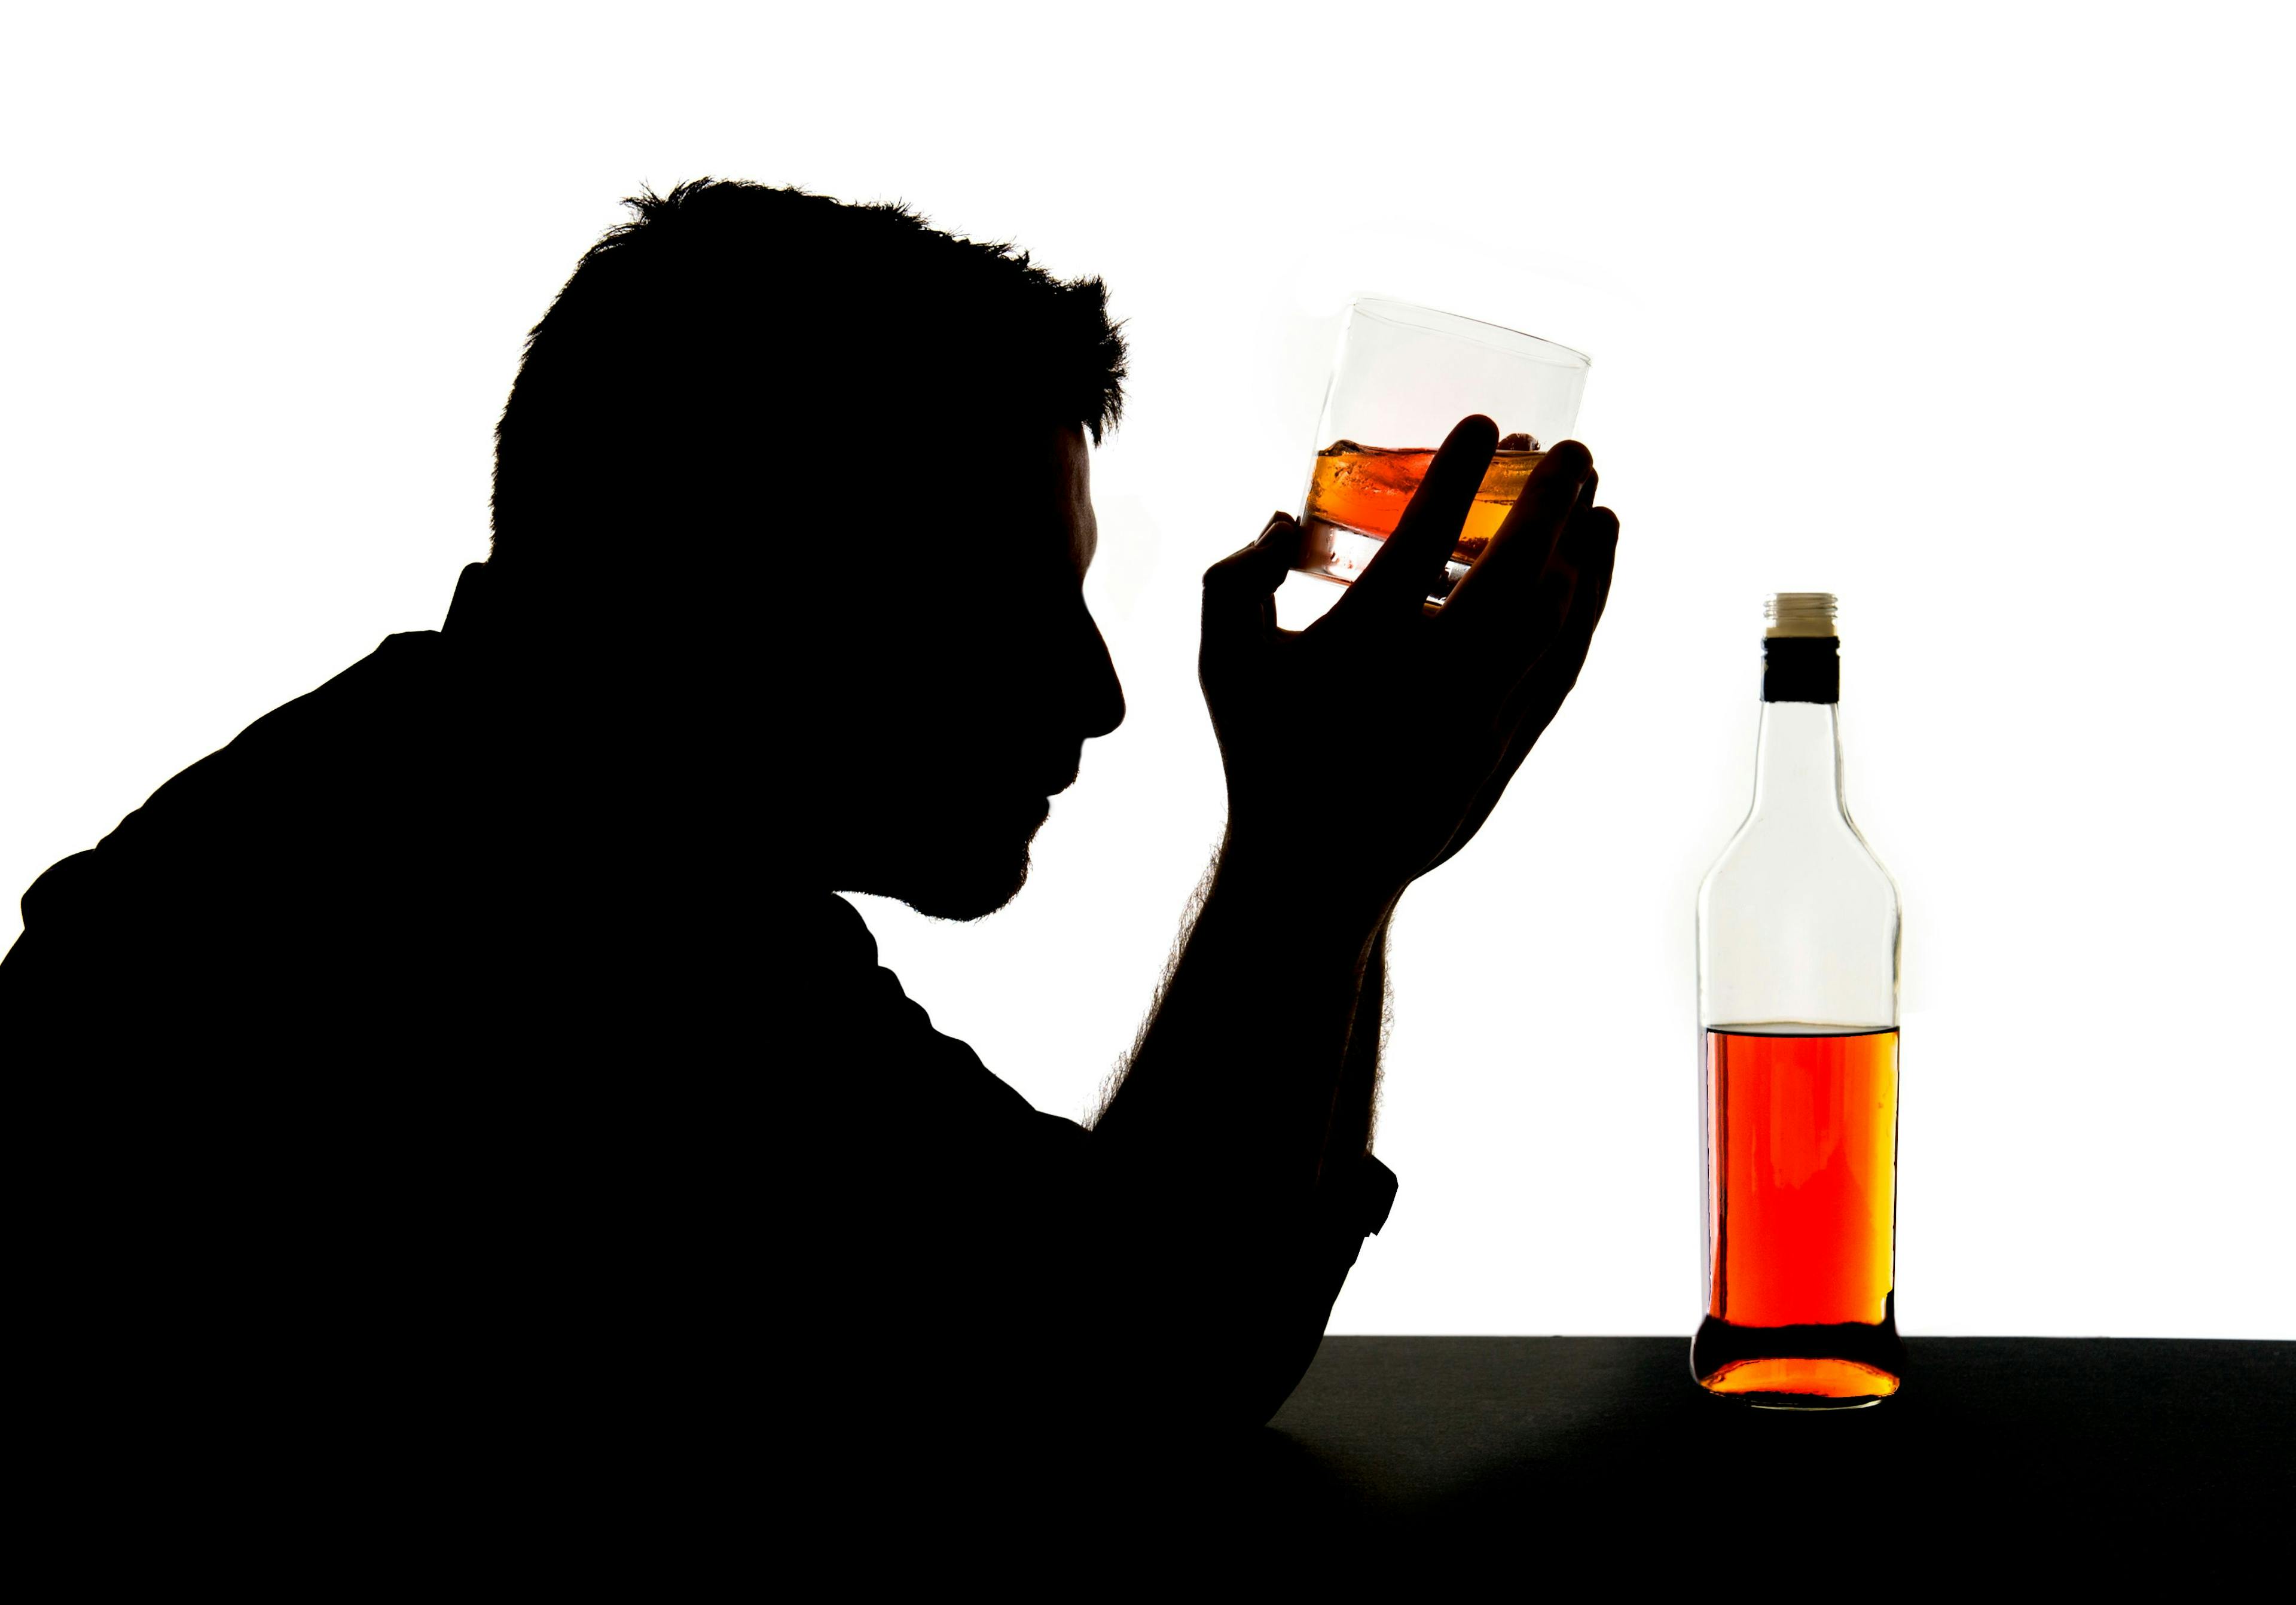 Silhouette of a man drinking alcohol | Image credit: © Wordley Calvo Stock - stock.adobe.com